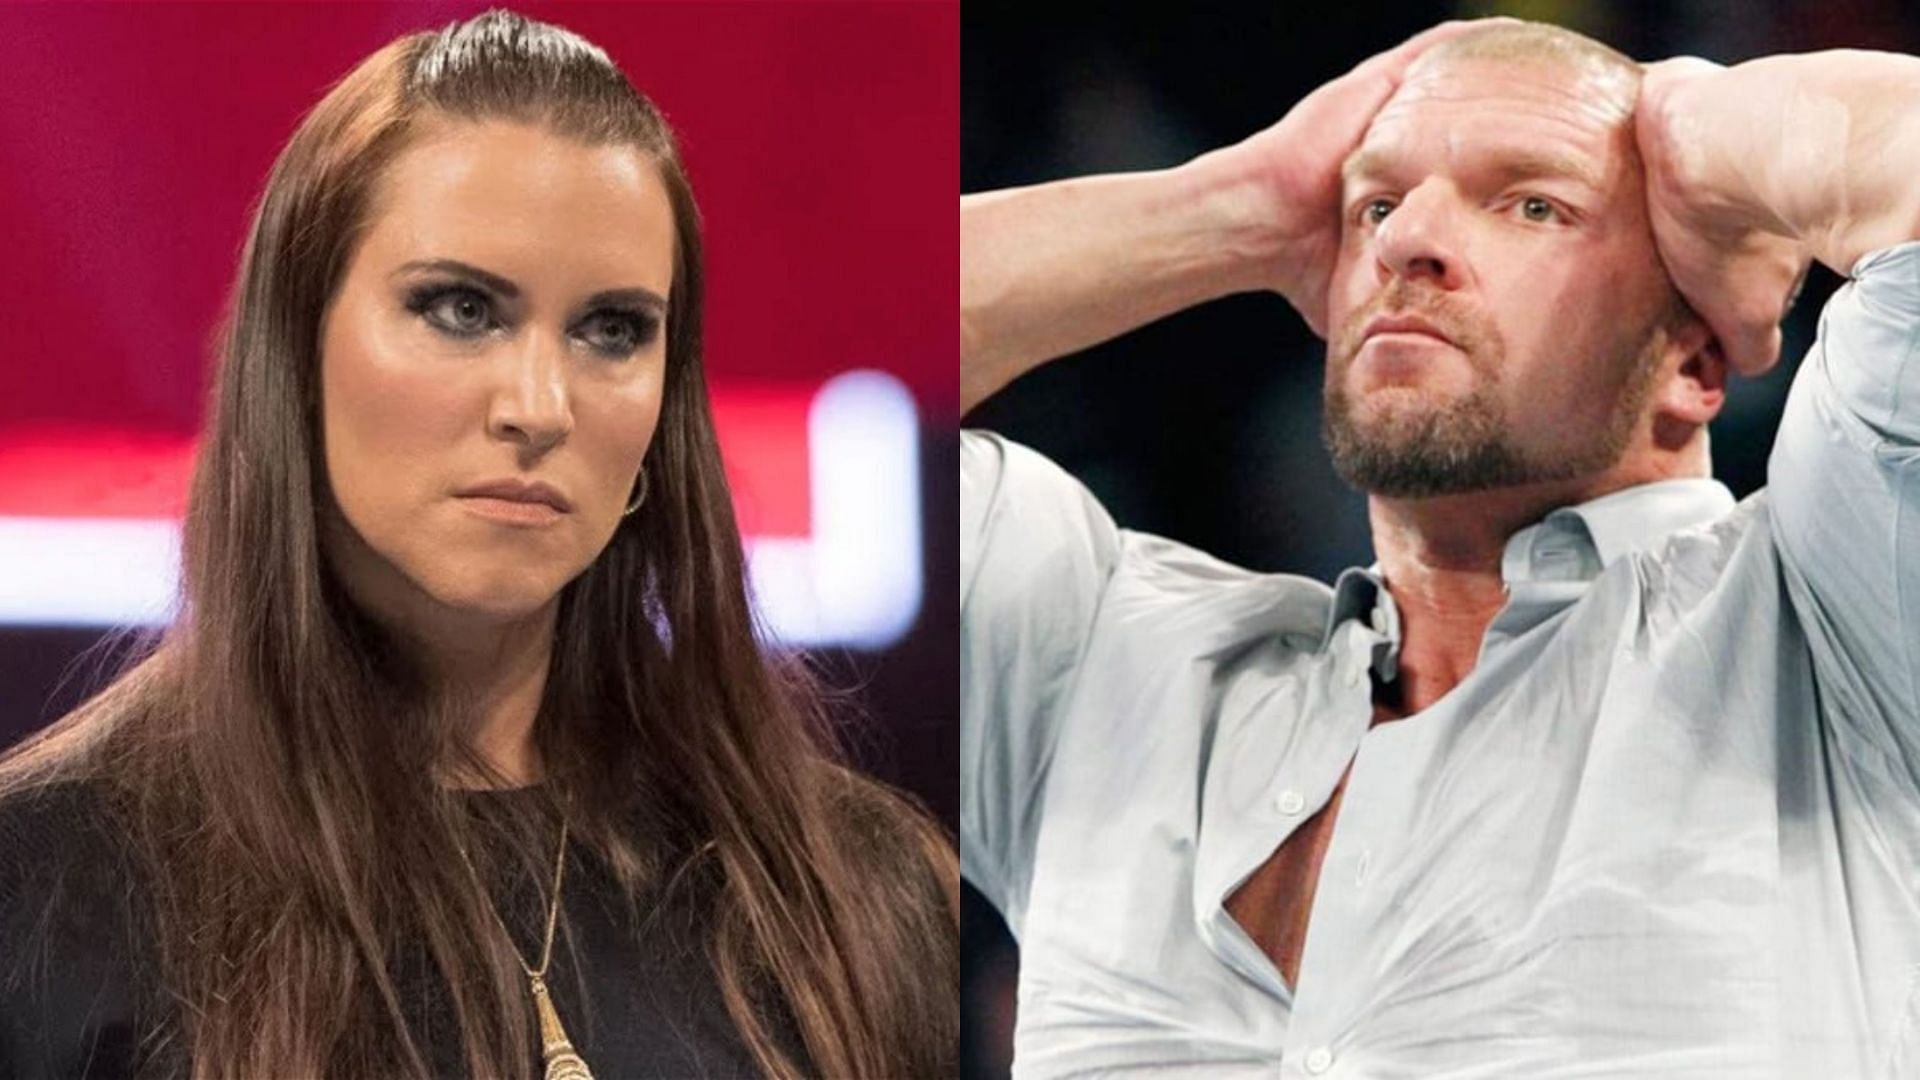 When Stephanie McMahon got mad at Triple H for calling current WWE female stars name during